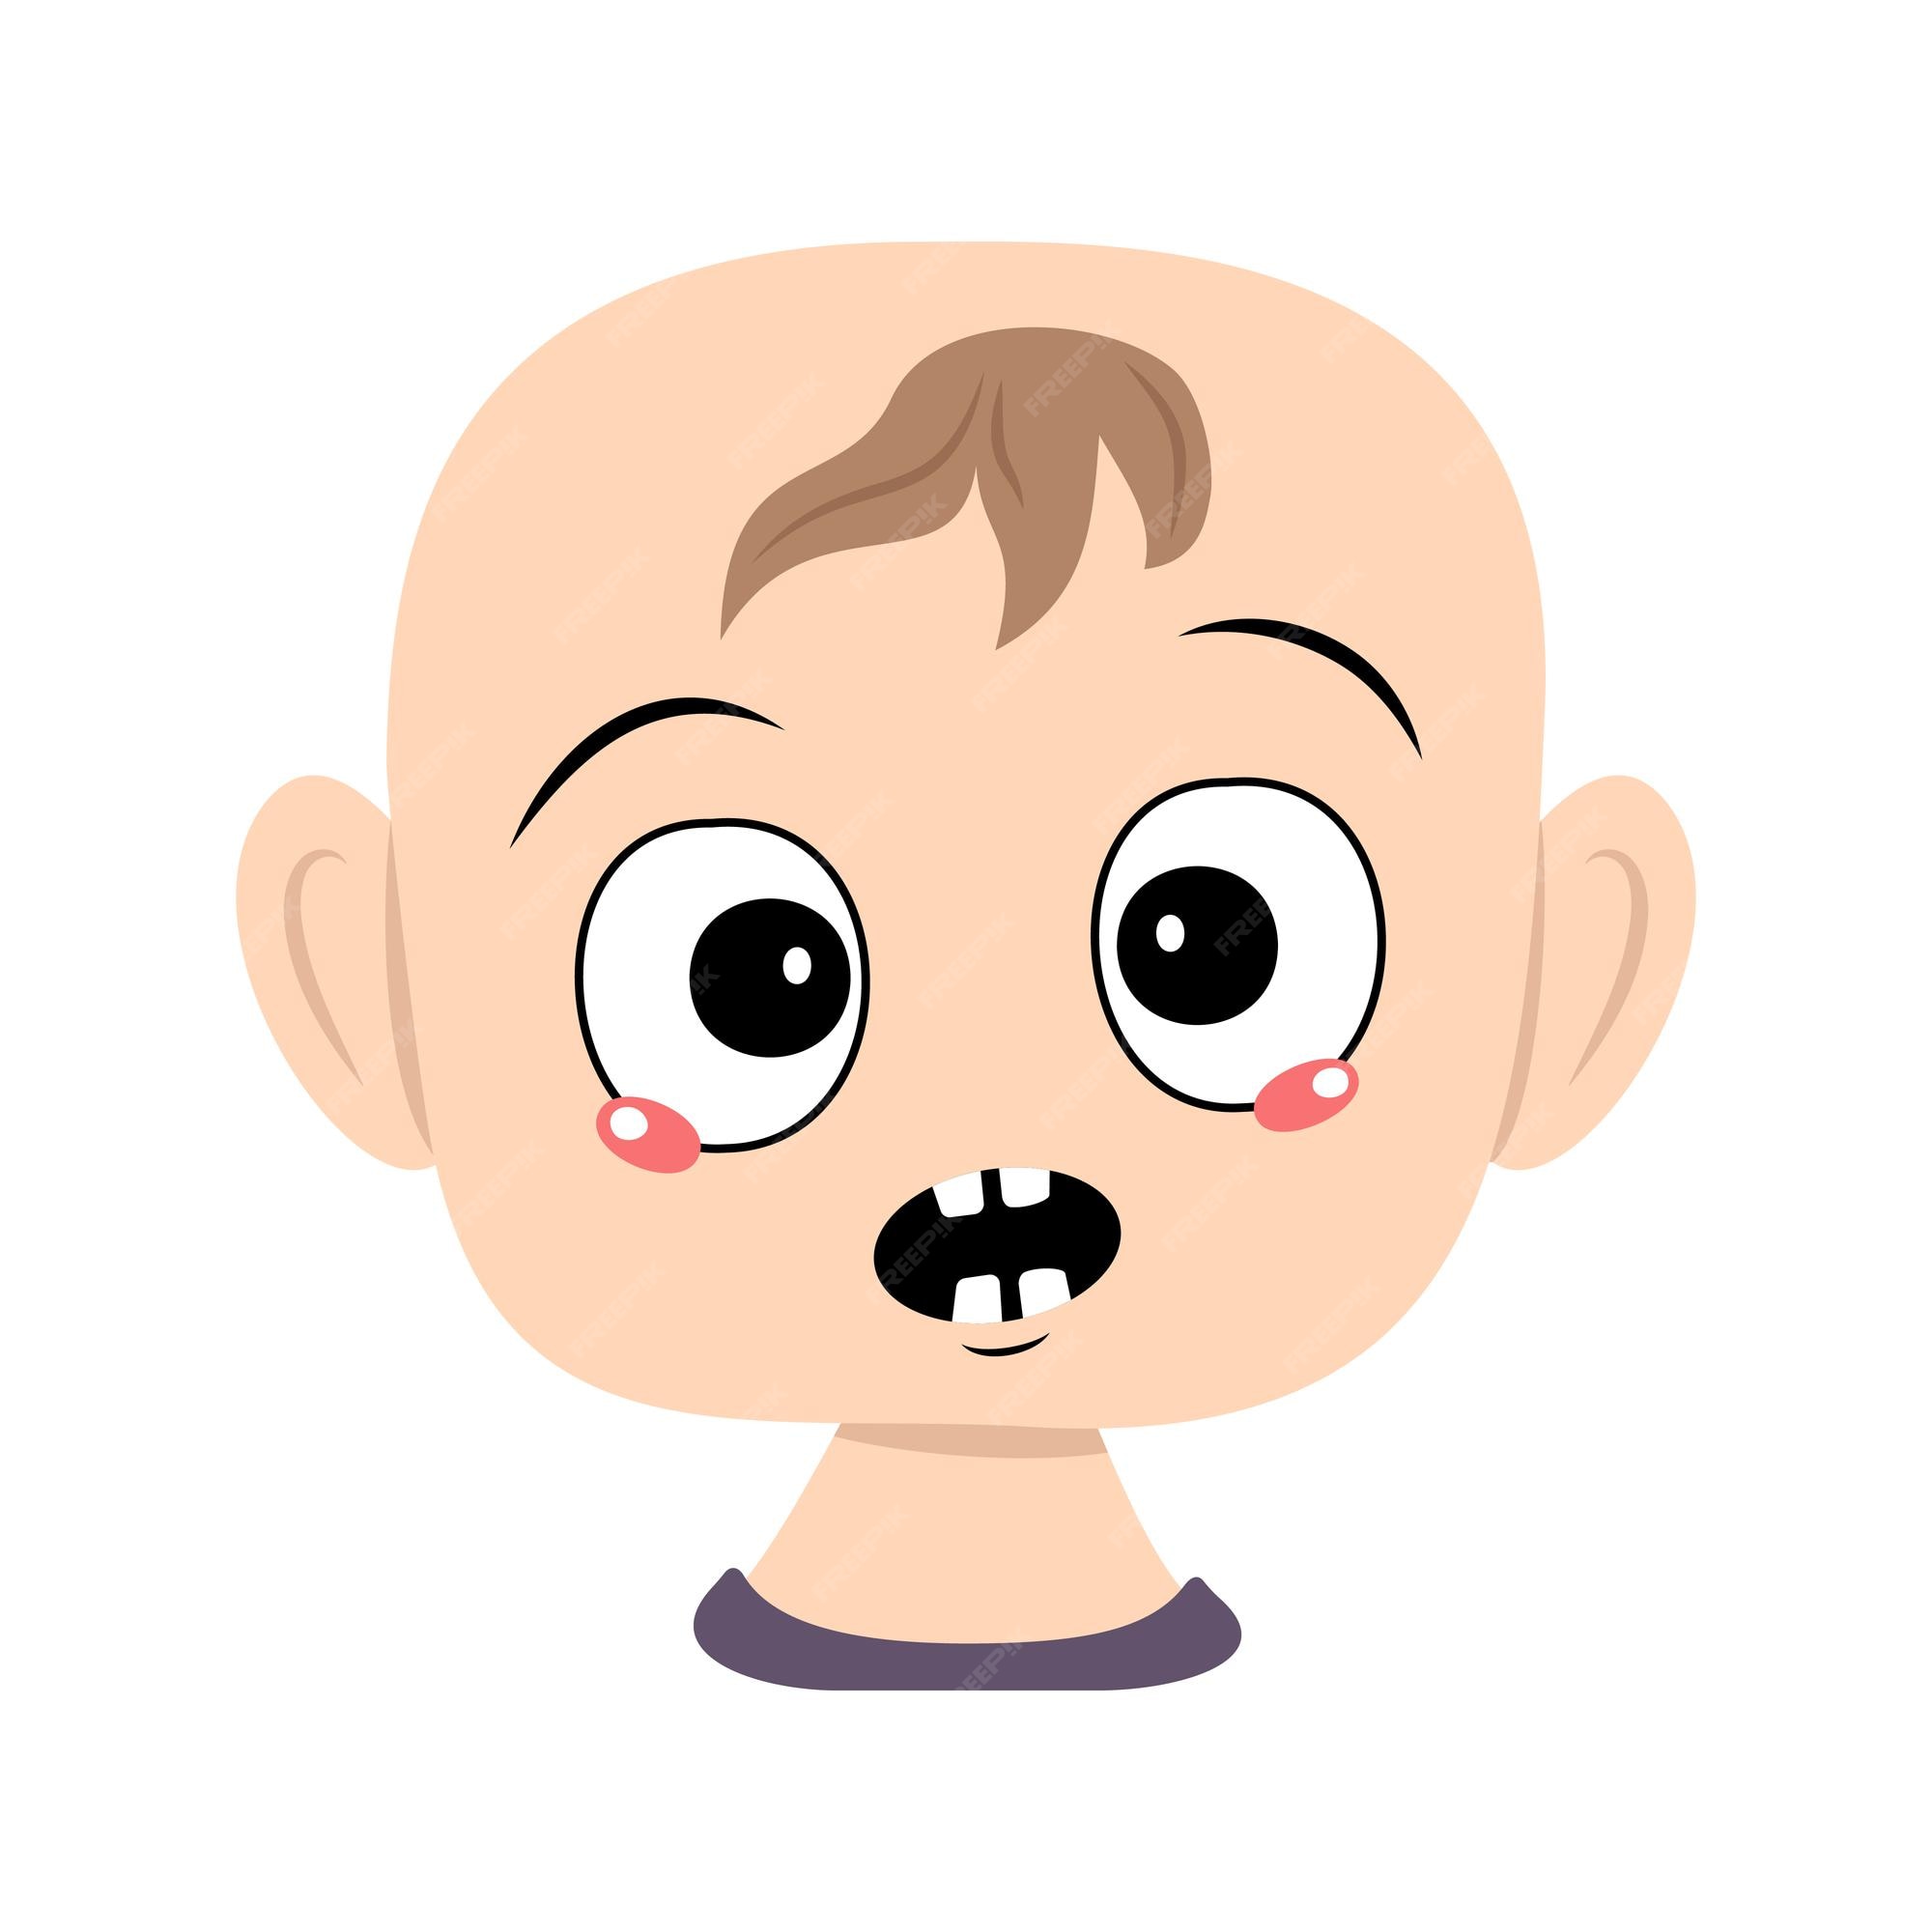 Premium Vector | Child with emotions panic, surprised face, shocked eyes.  head of baby with scared expression